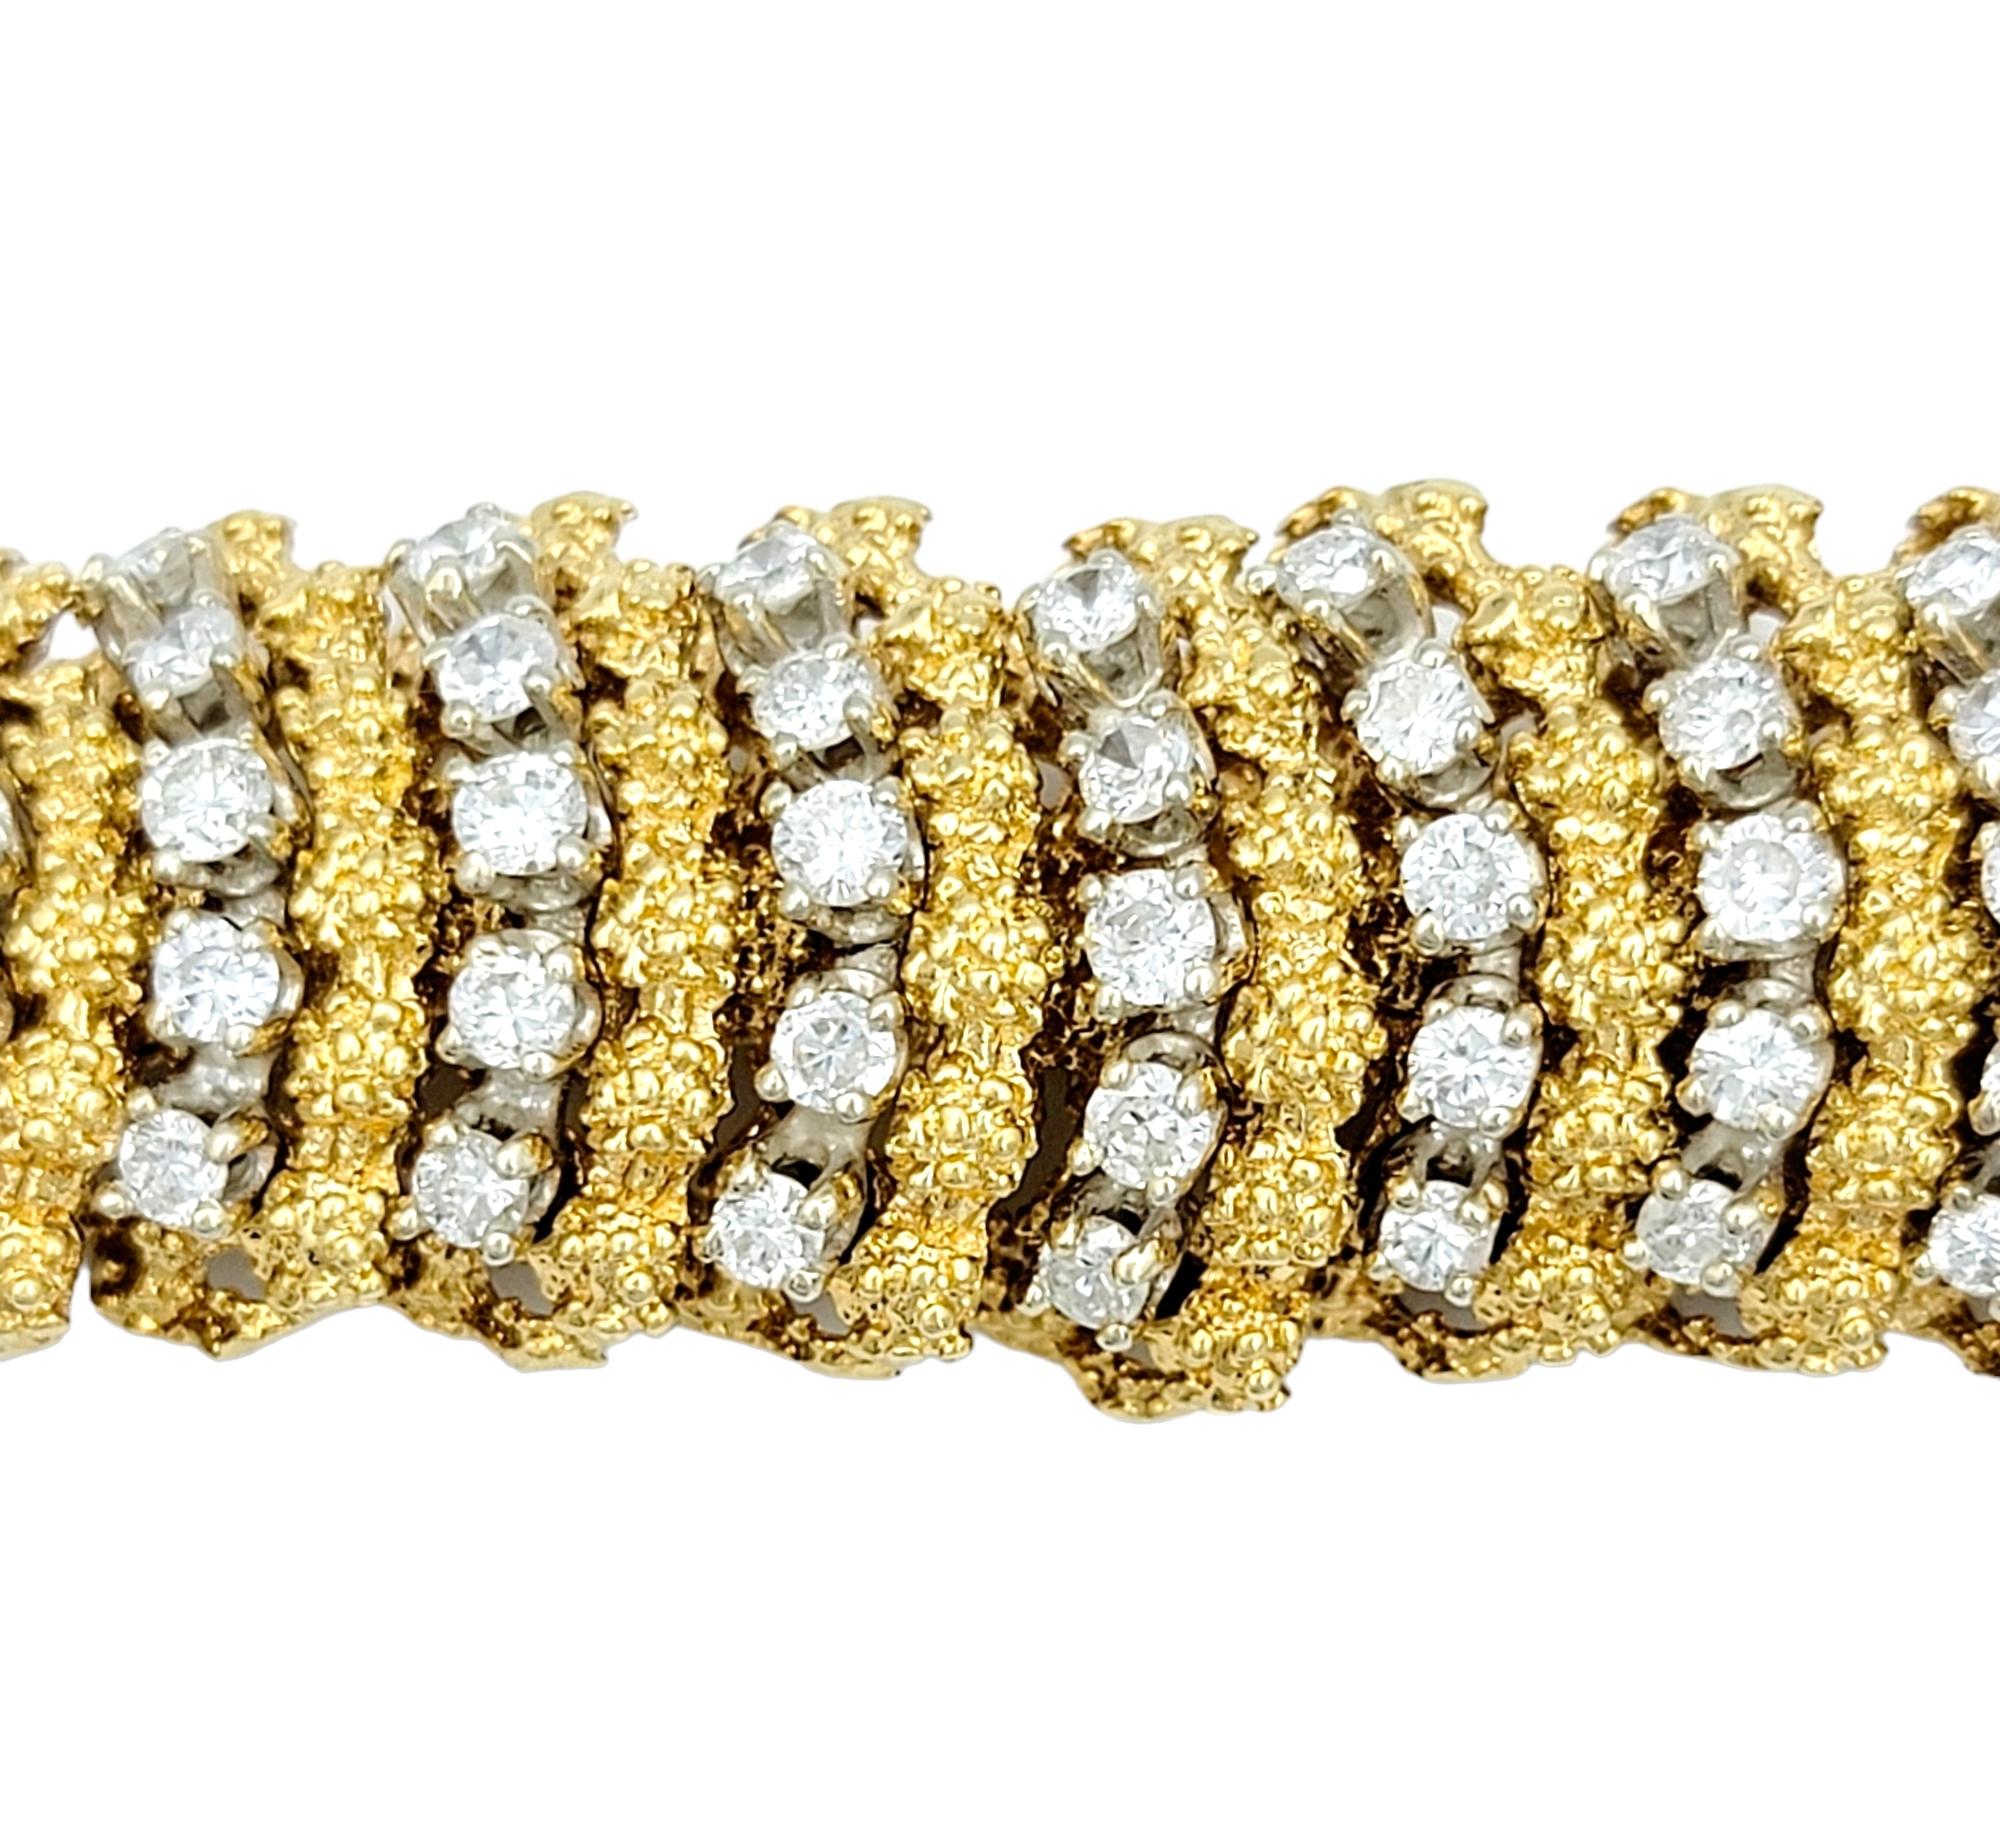 Vintage Hammerman Brothers Diamond Caterpillar Bracelet in 18K Yellow Gold In Good Condition For Sale In Scottsdale, AZ